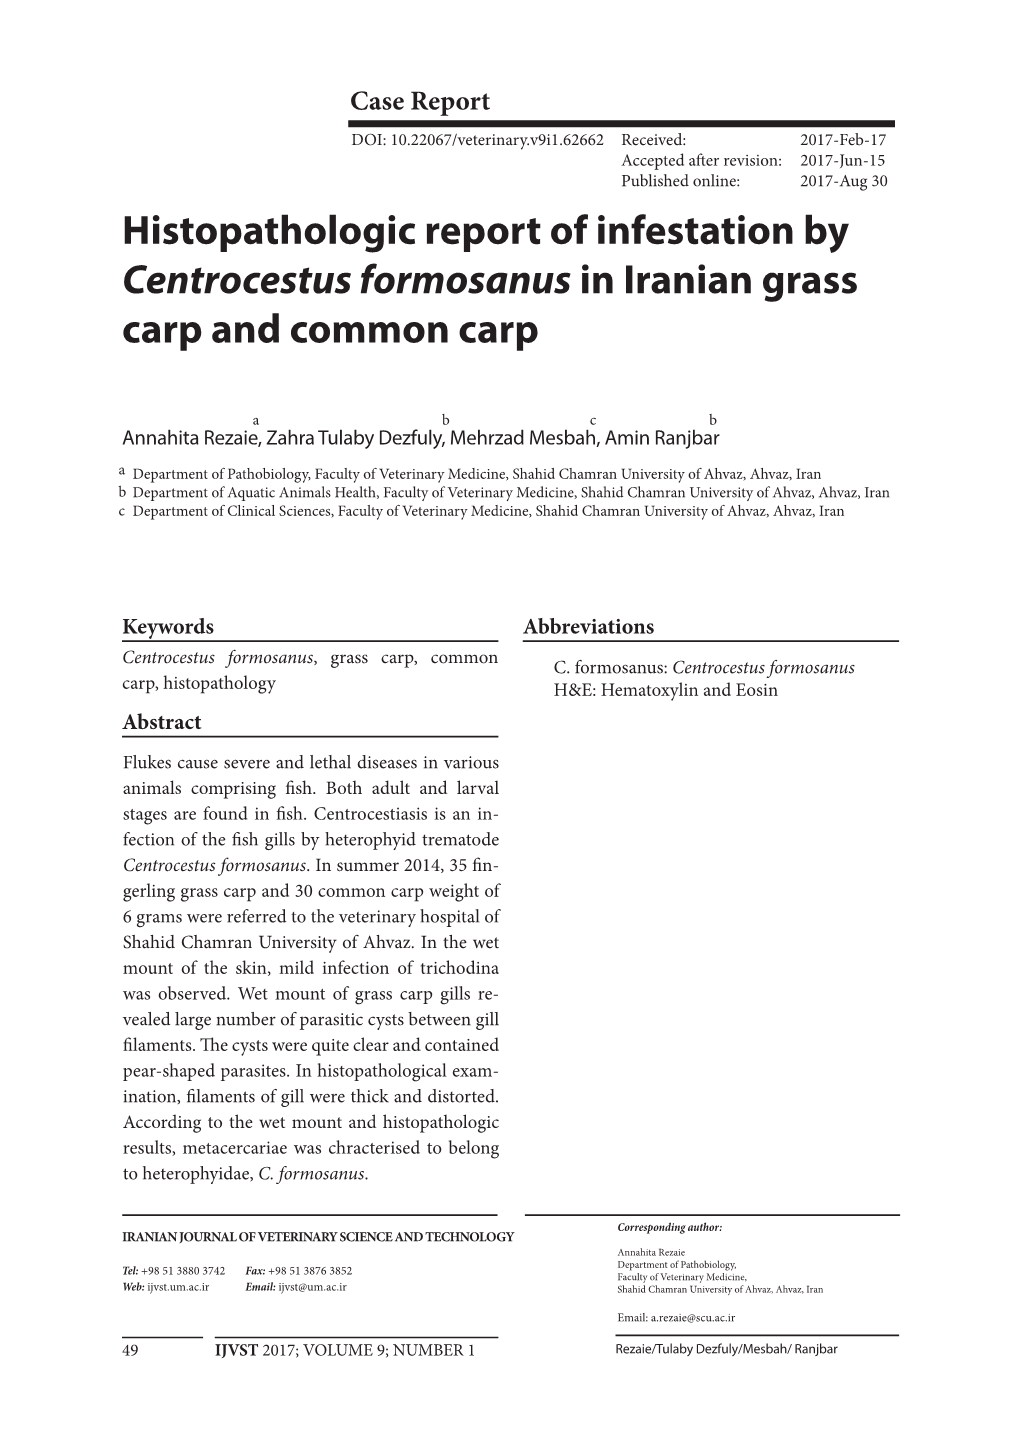 Histopathologic Report of Infestation by Centrocestus Formosanus in Iranian Grass Carp and Common Carp